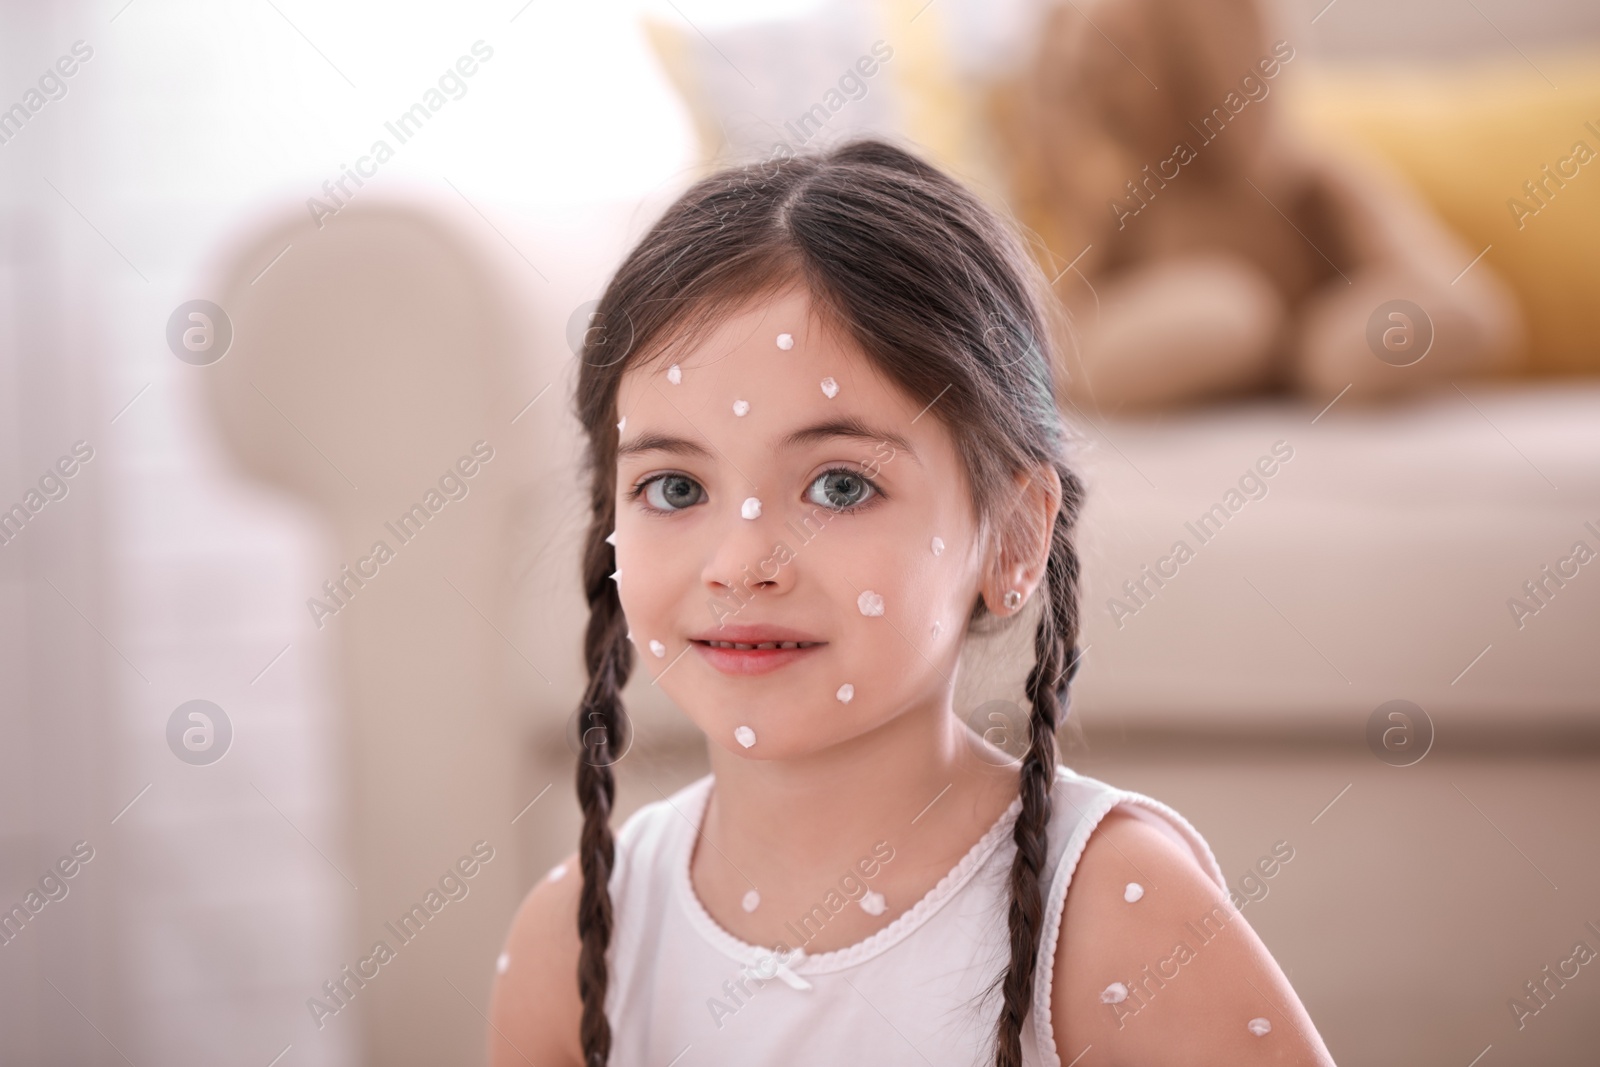 Photo of Adorable little girl with chickenpox at home